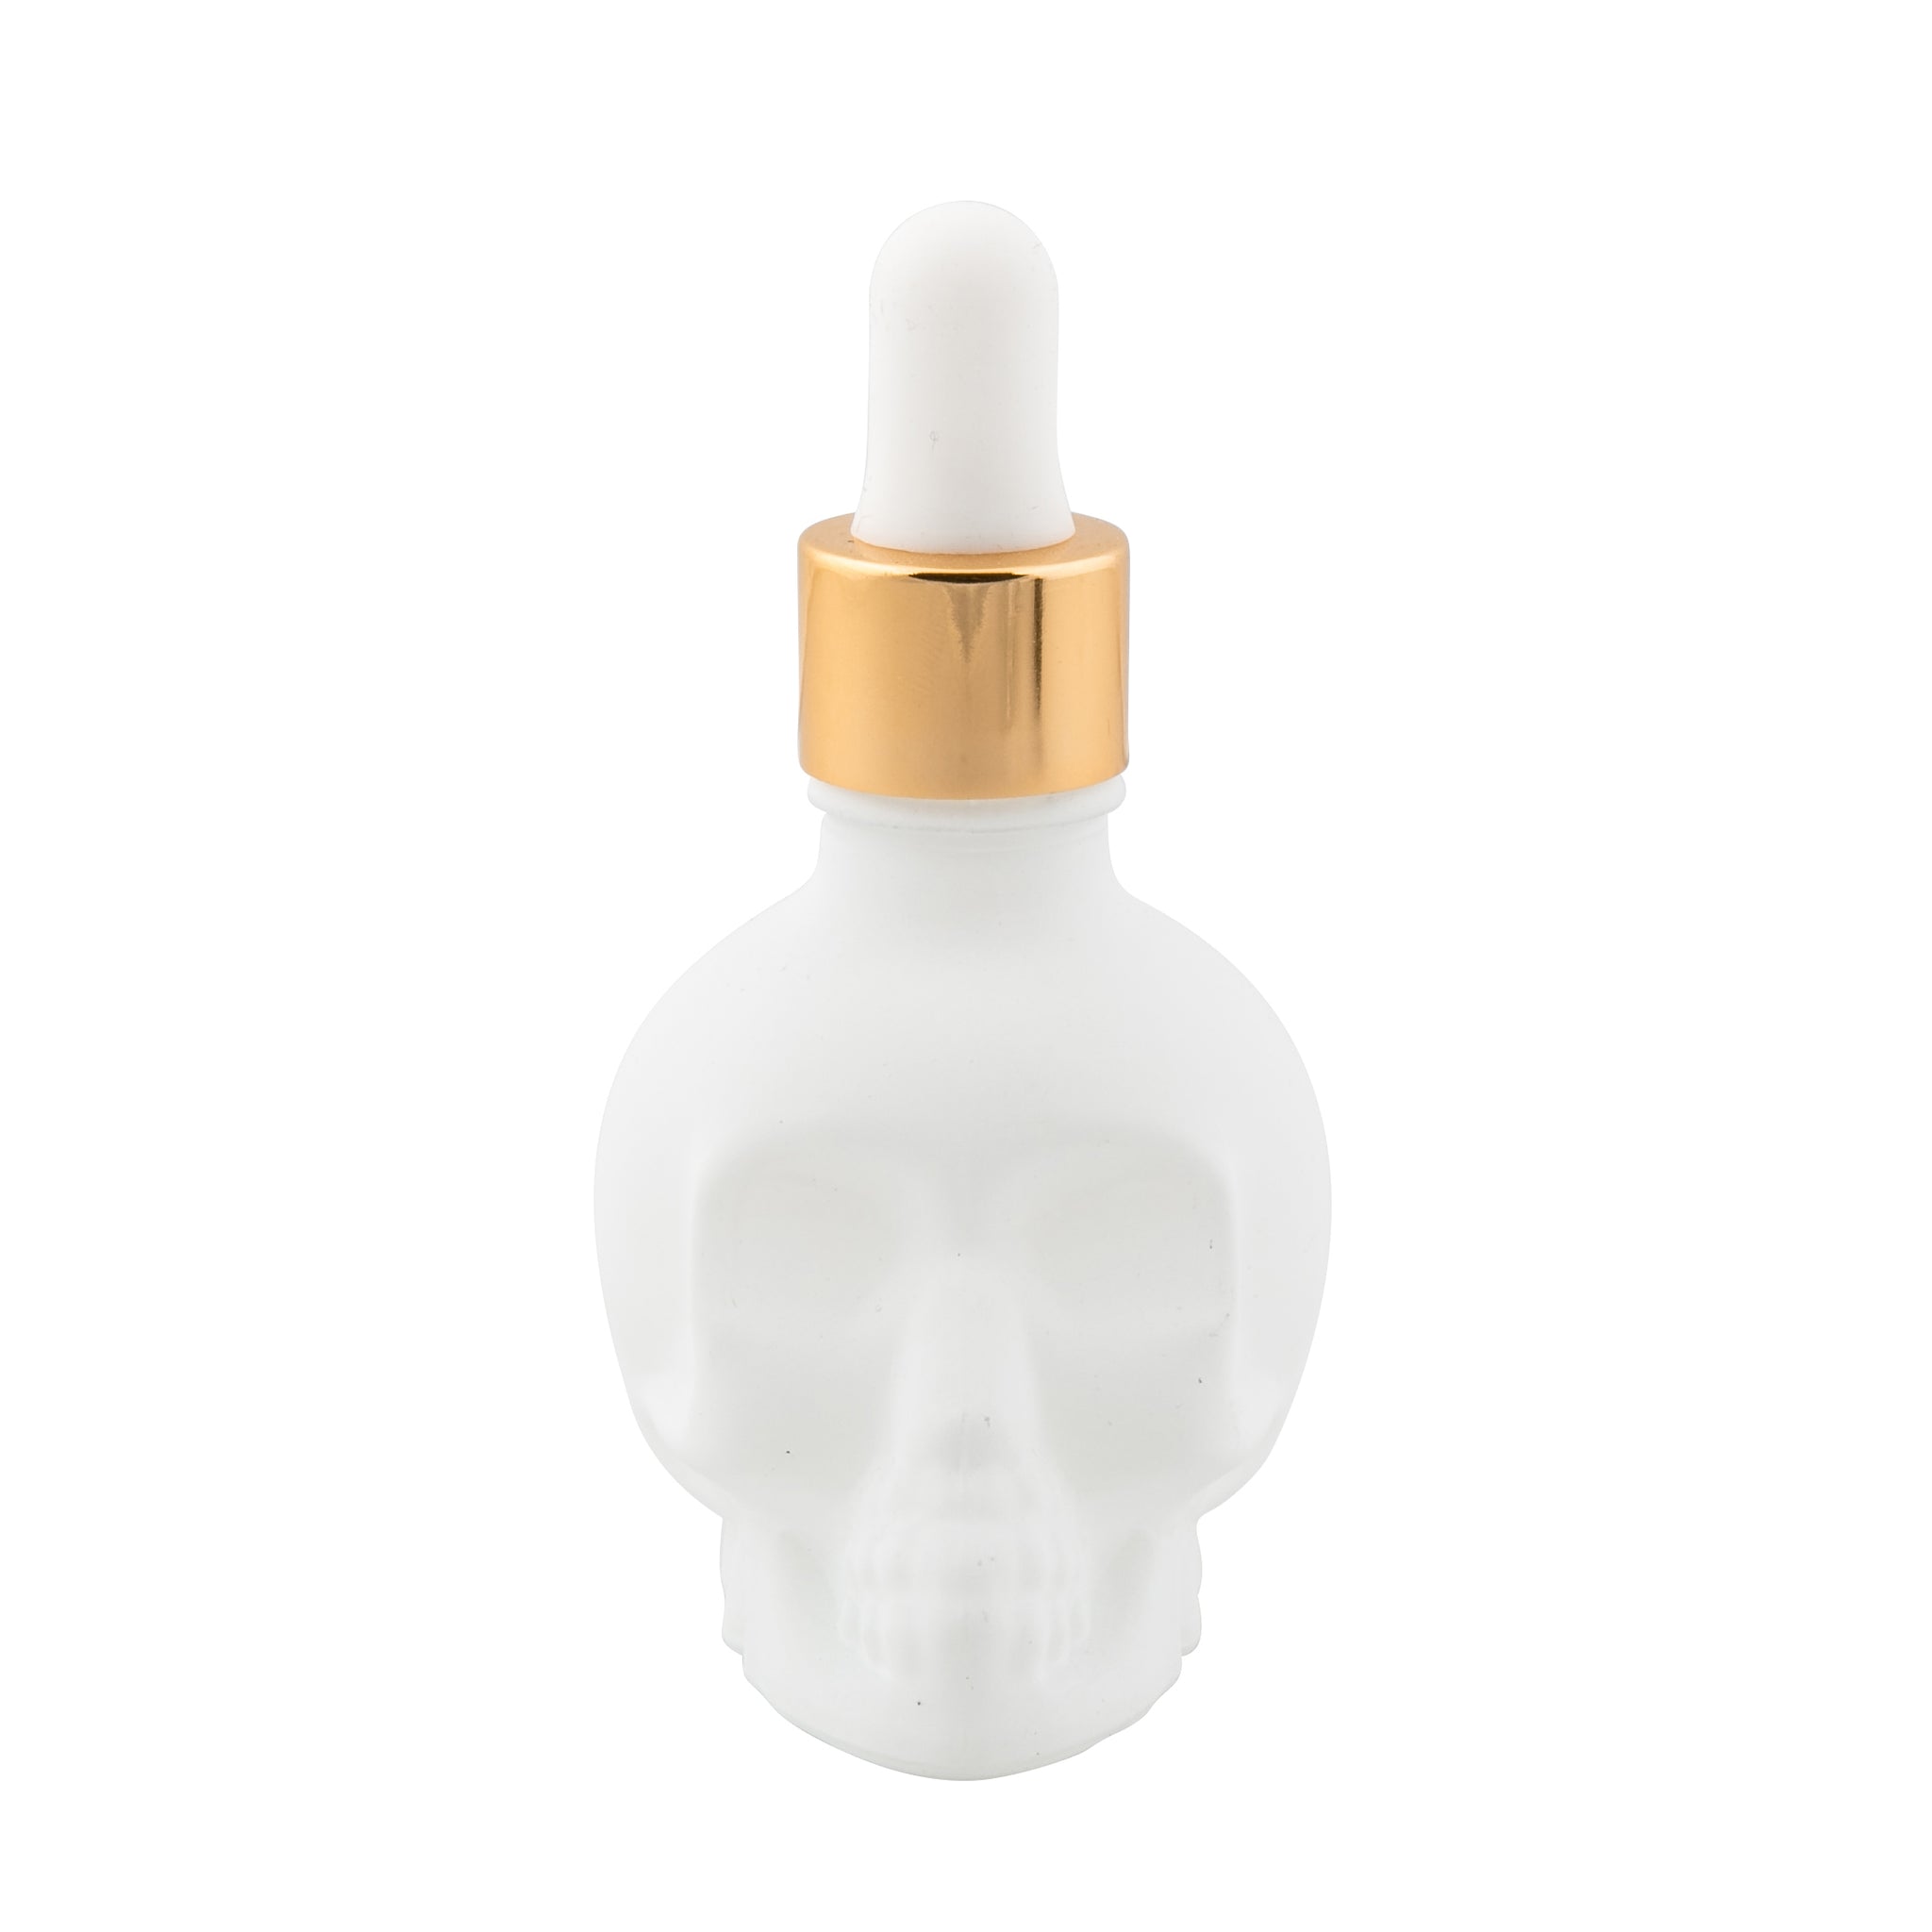 Skull Bitters Bottle in black, white and clear